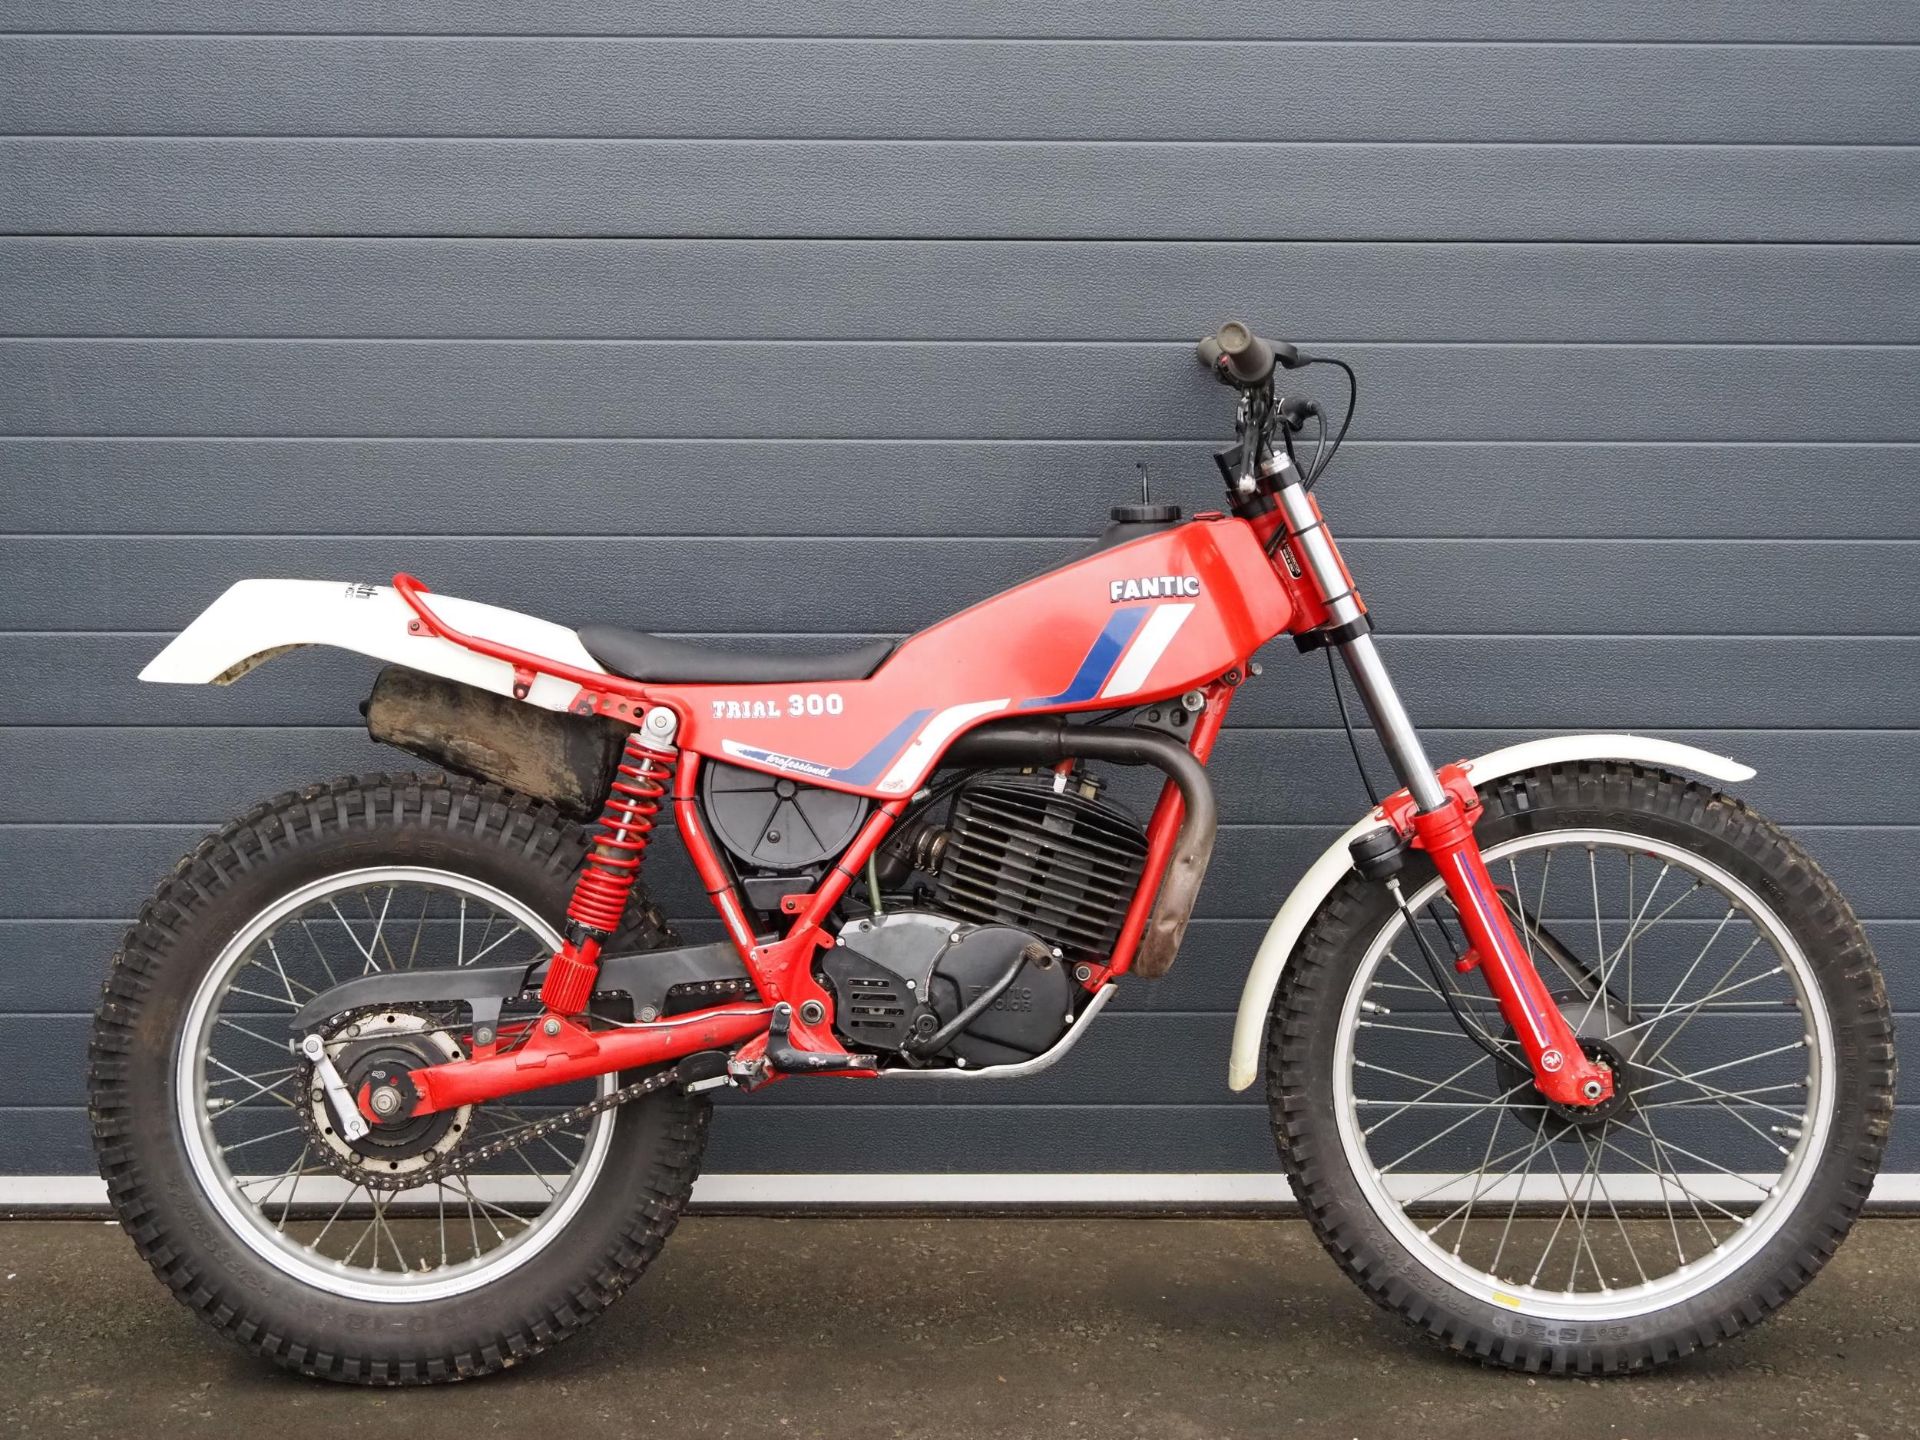 Fantic Trials 300 professional bike. 249 cc Frame No. 34001839 Engine No. 001842 Fitted with